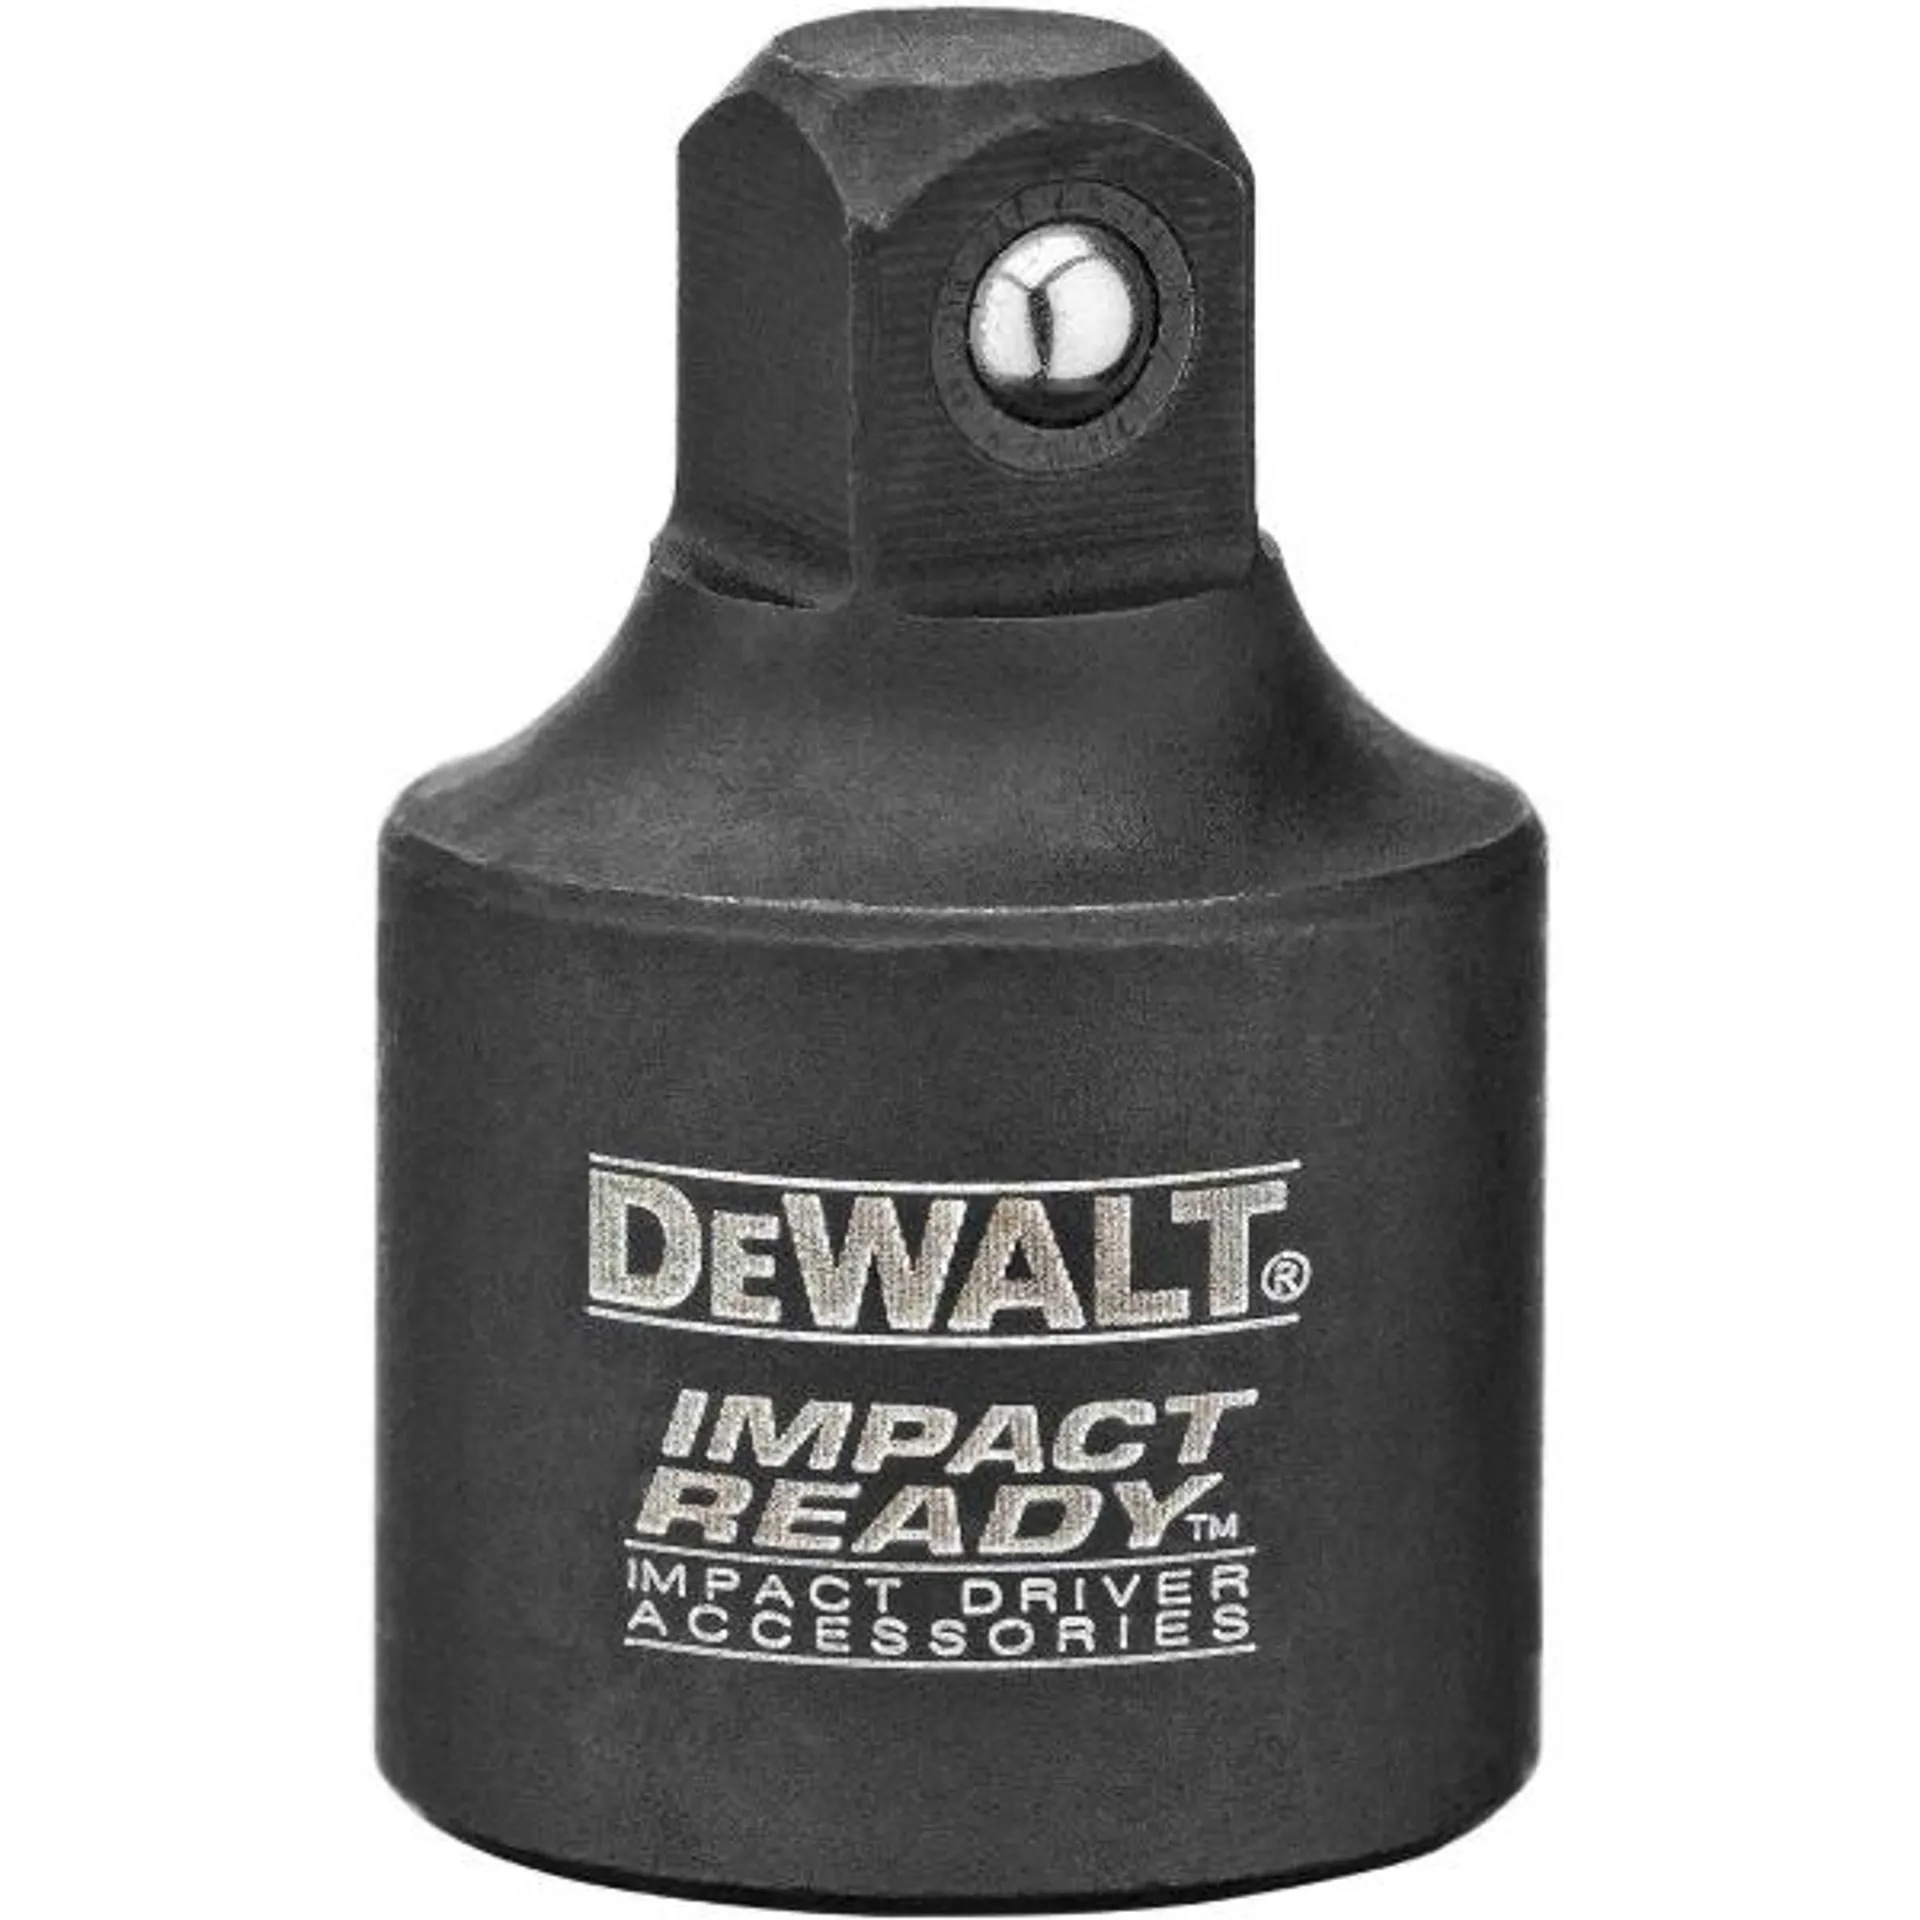 Impact Ready 1/2" to 3/8" Socket Adapter - DW2299